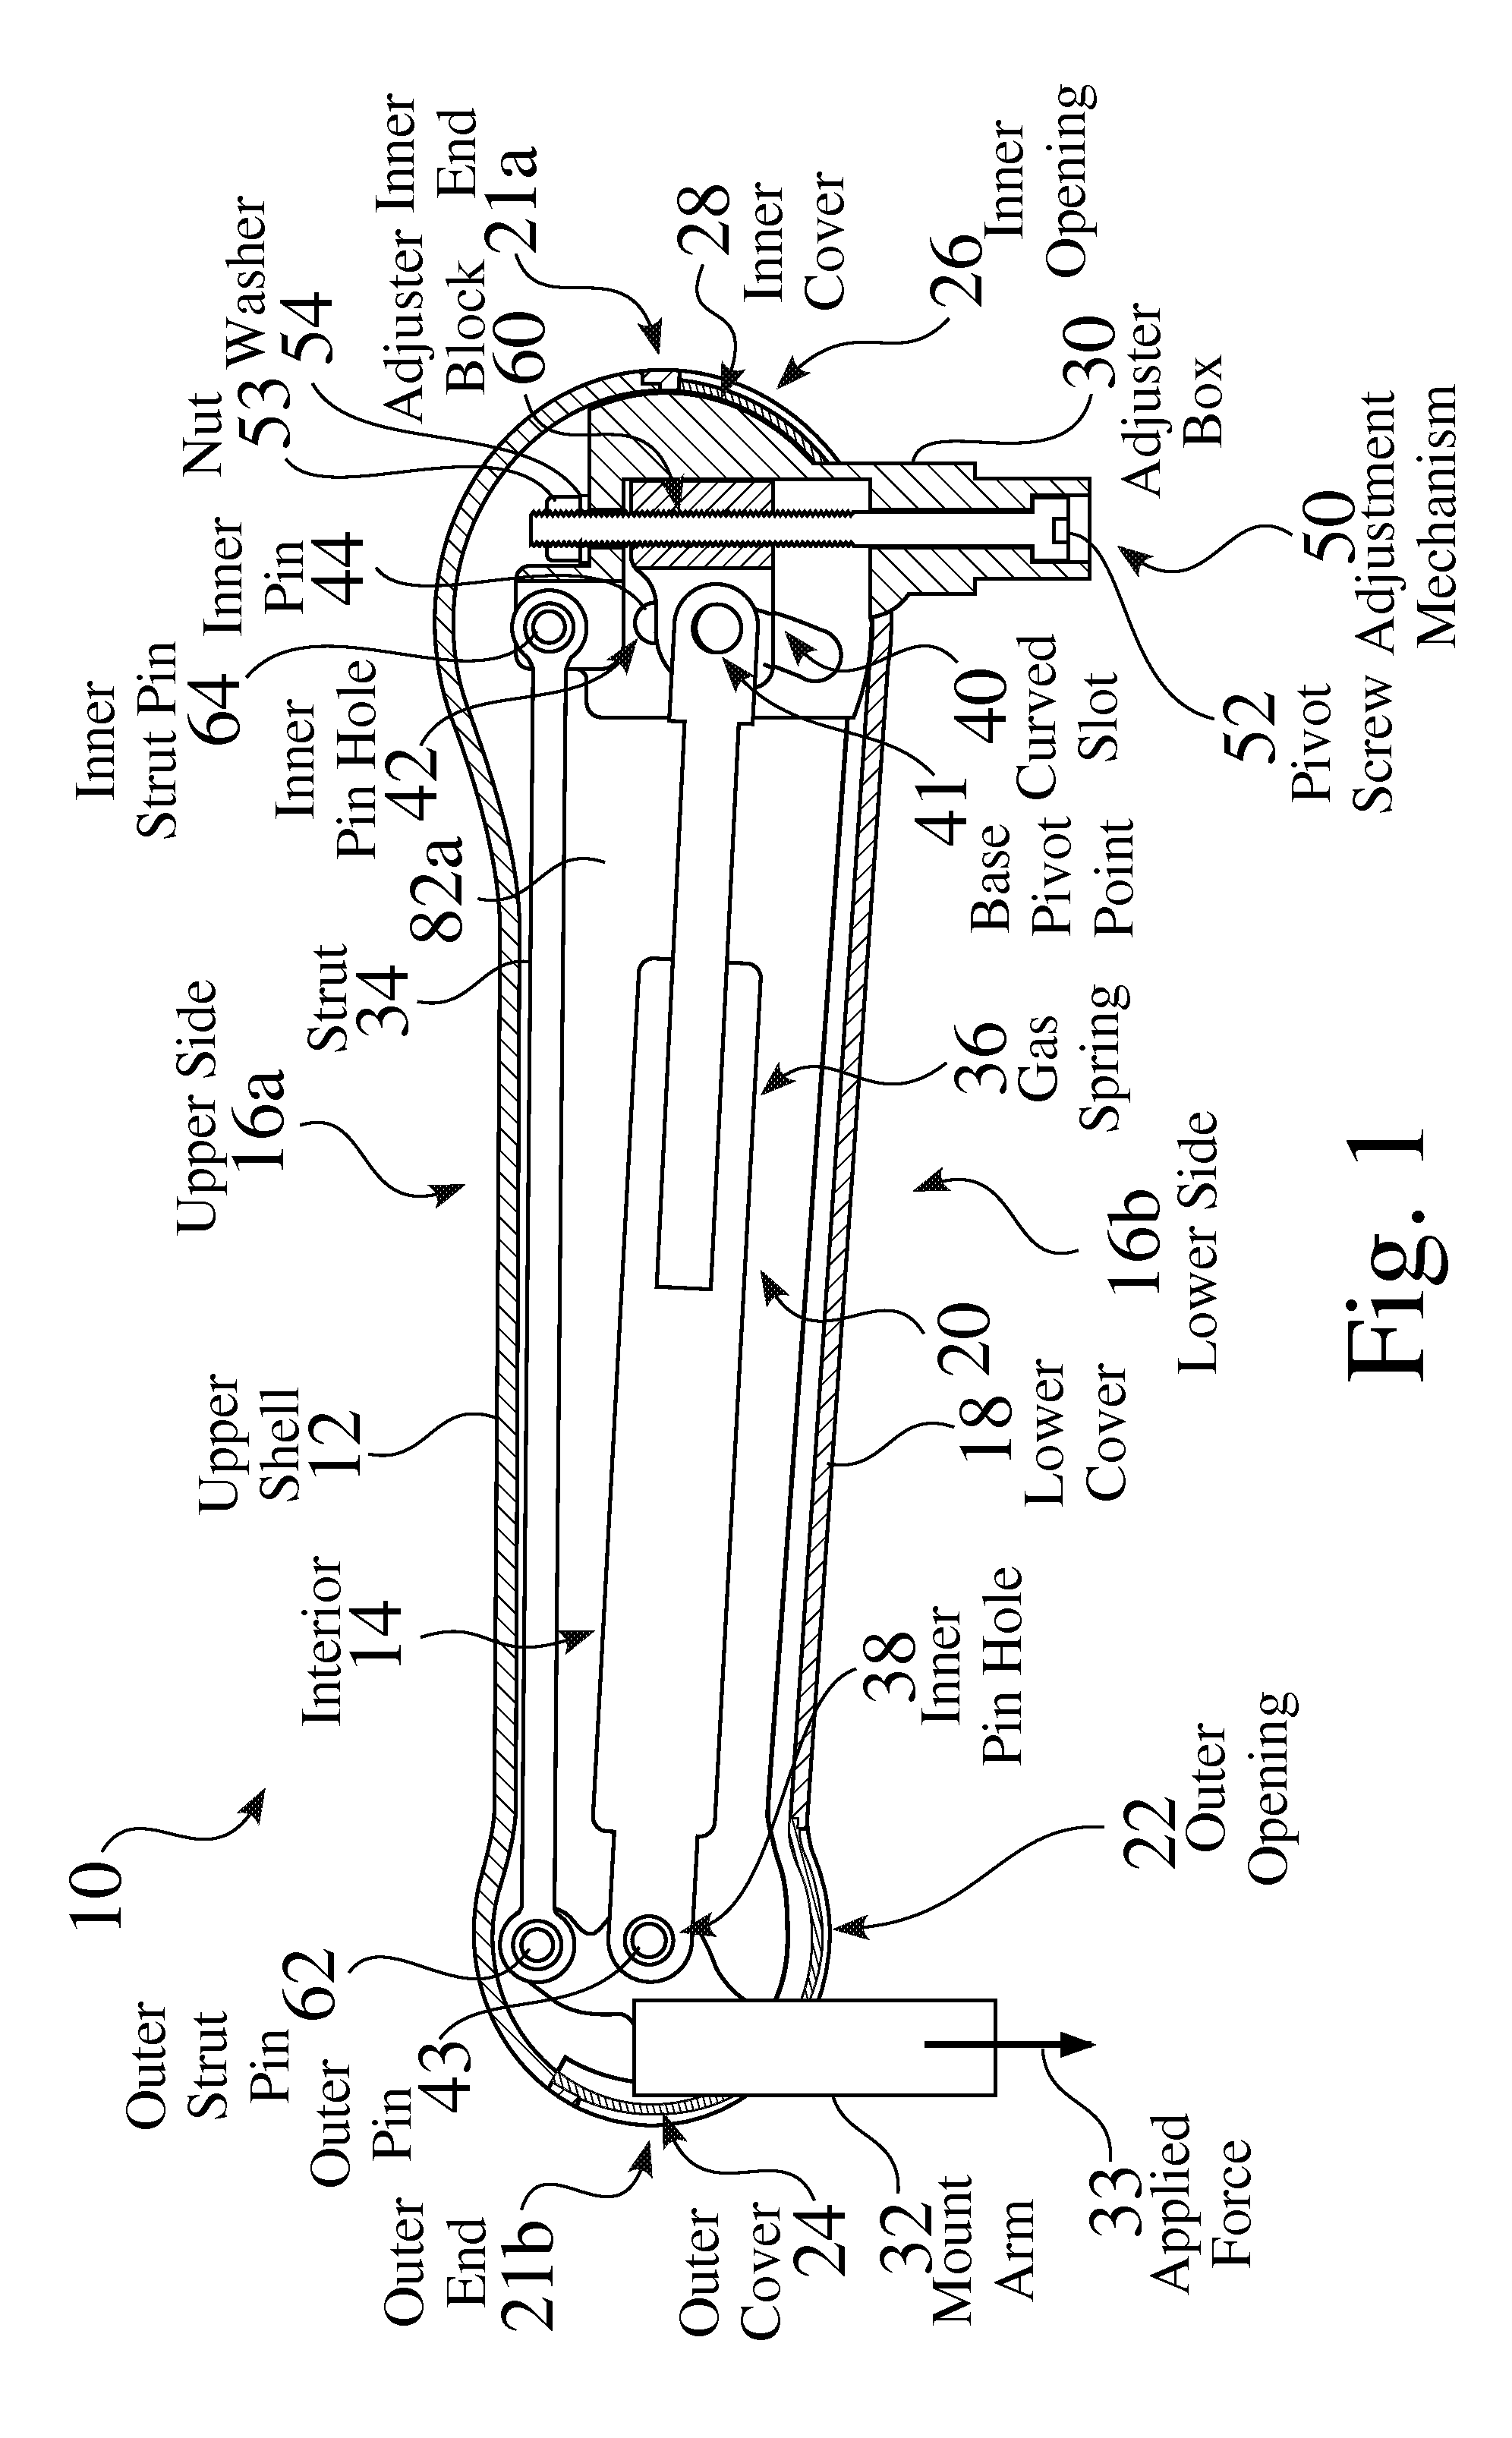 Variable height arm structures, systems, and methods